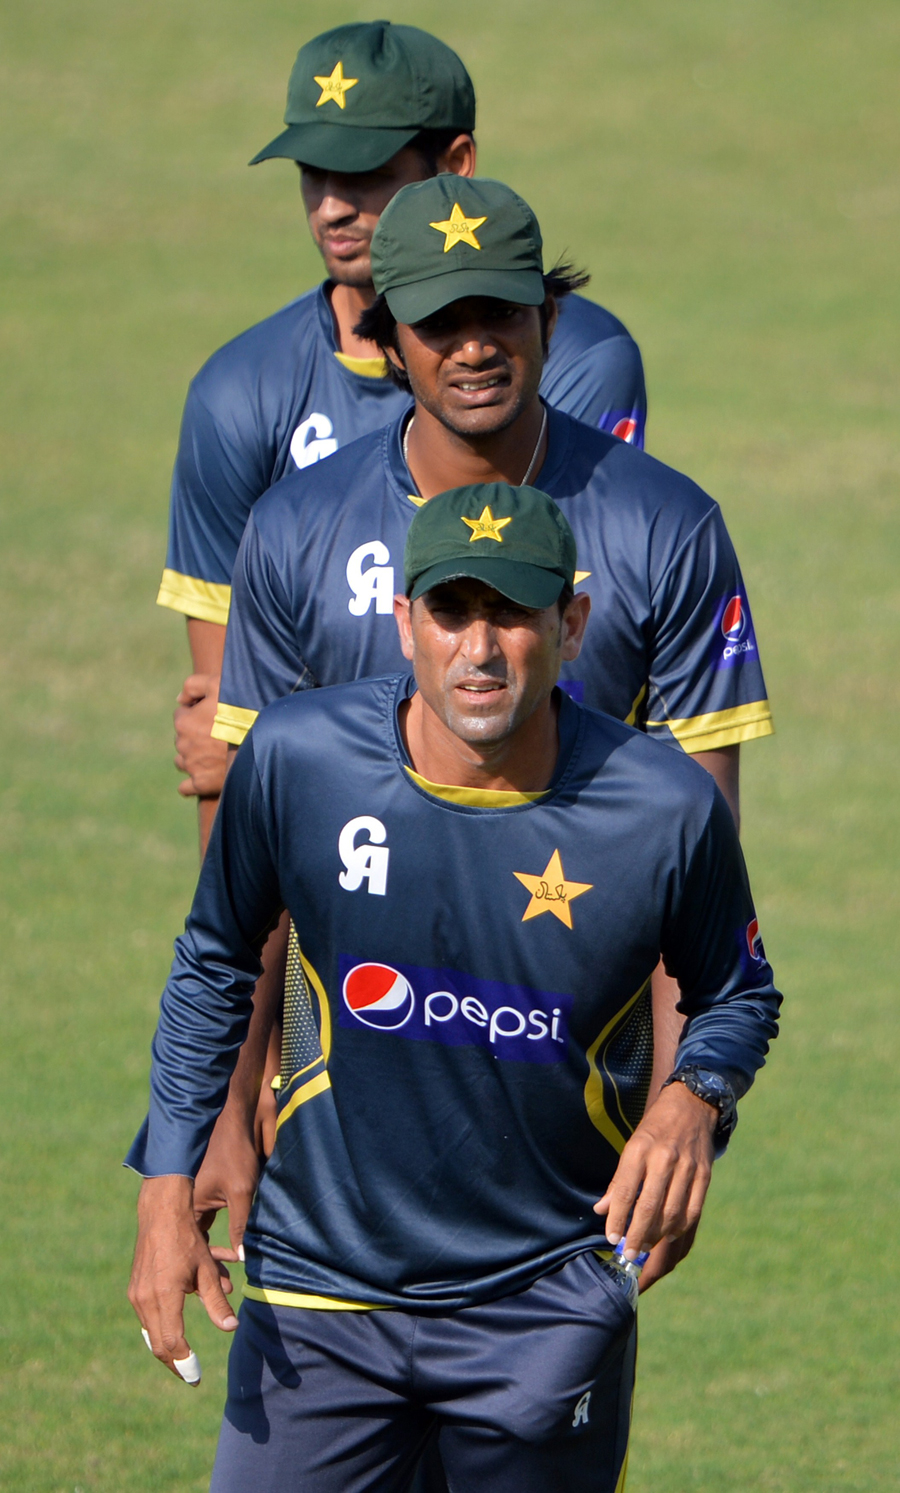 Pakistani players line up for a fielding drill during a practice session at Sharjah on Monday. Pakistan play New Zealand in 3rd Test from today.